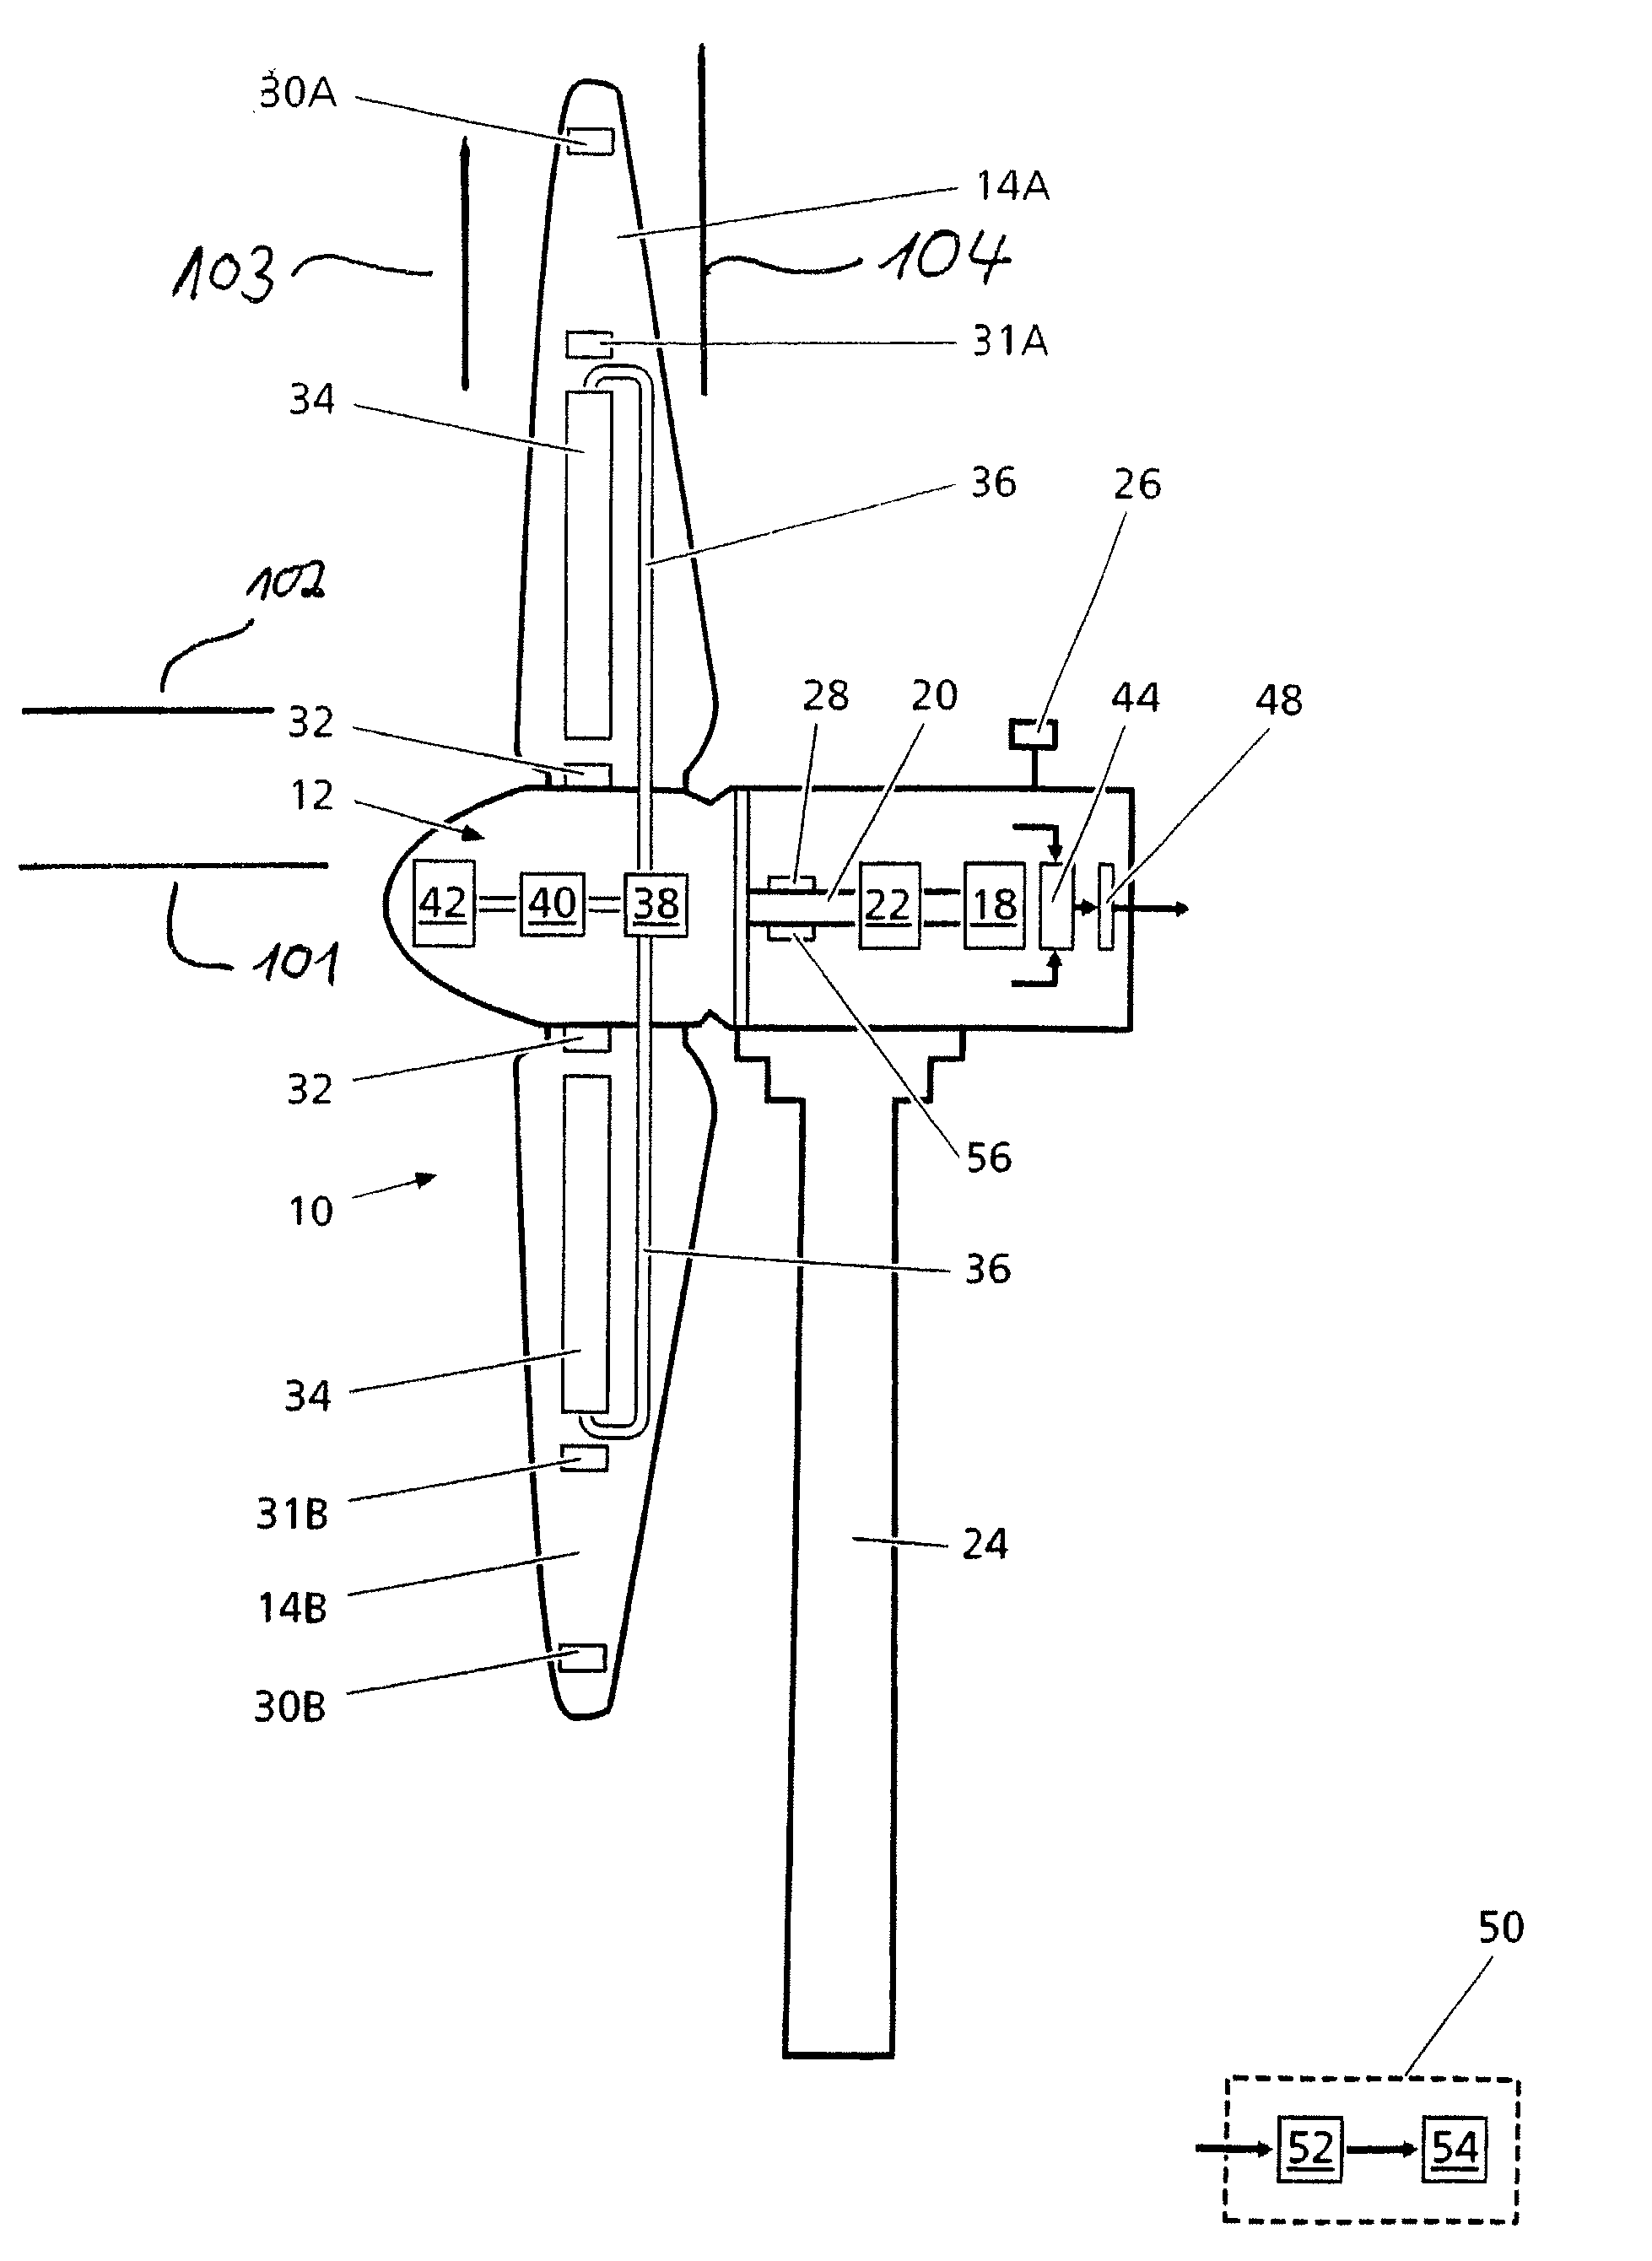 Device and method for detecting the loading of pivoted rotor blades